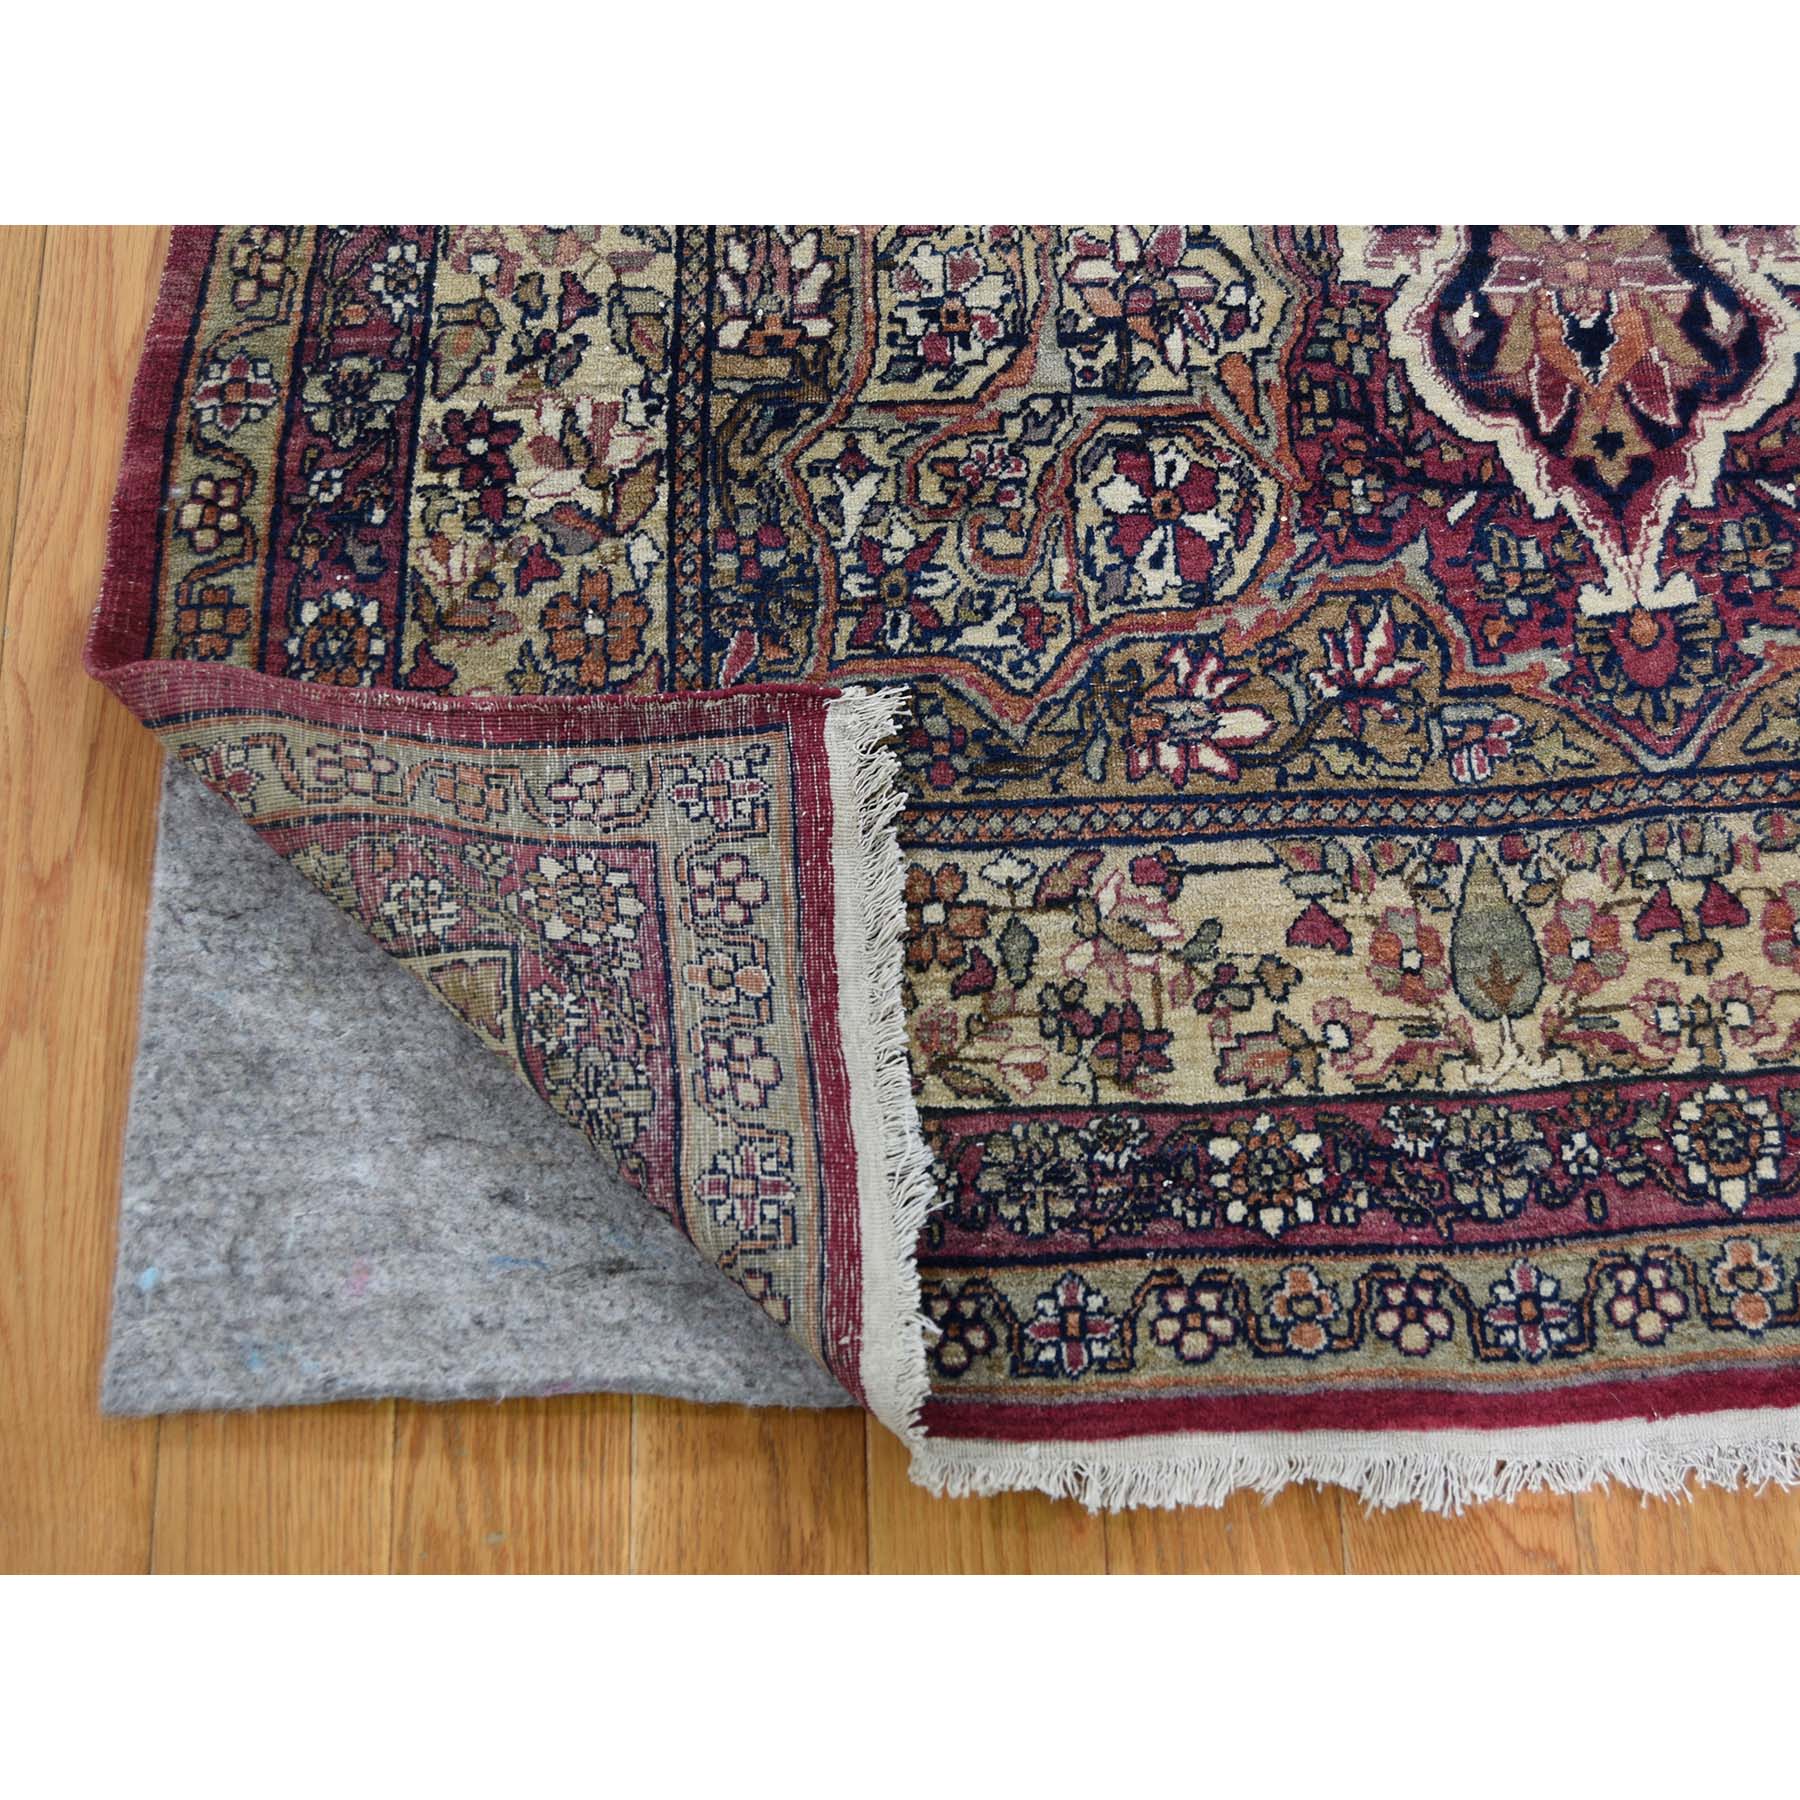 3-10 x7-10  Red Antique Persian Kerman Shah Good Condition Even Wear Soft Hand-Knotted Oriental Rug 